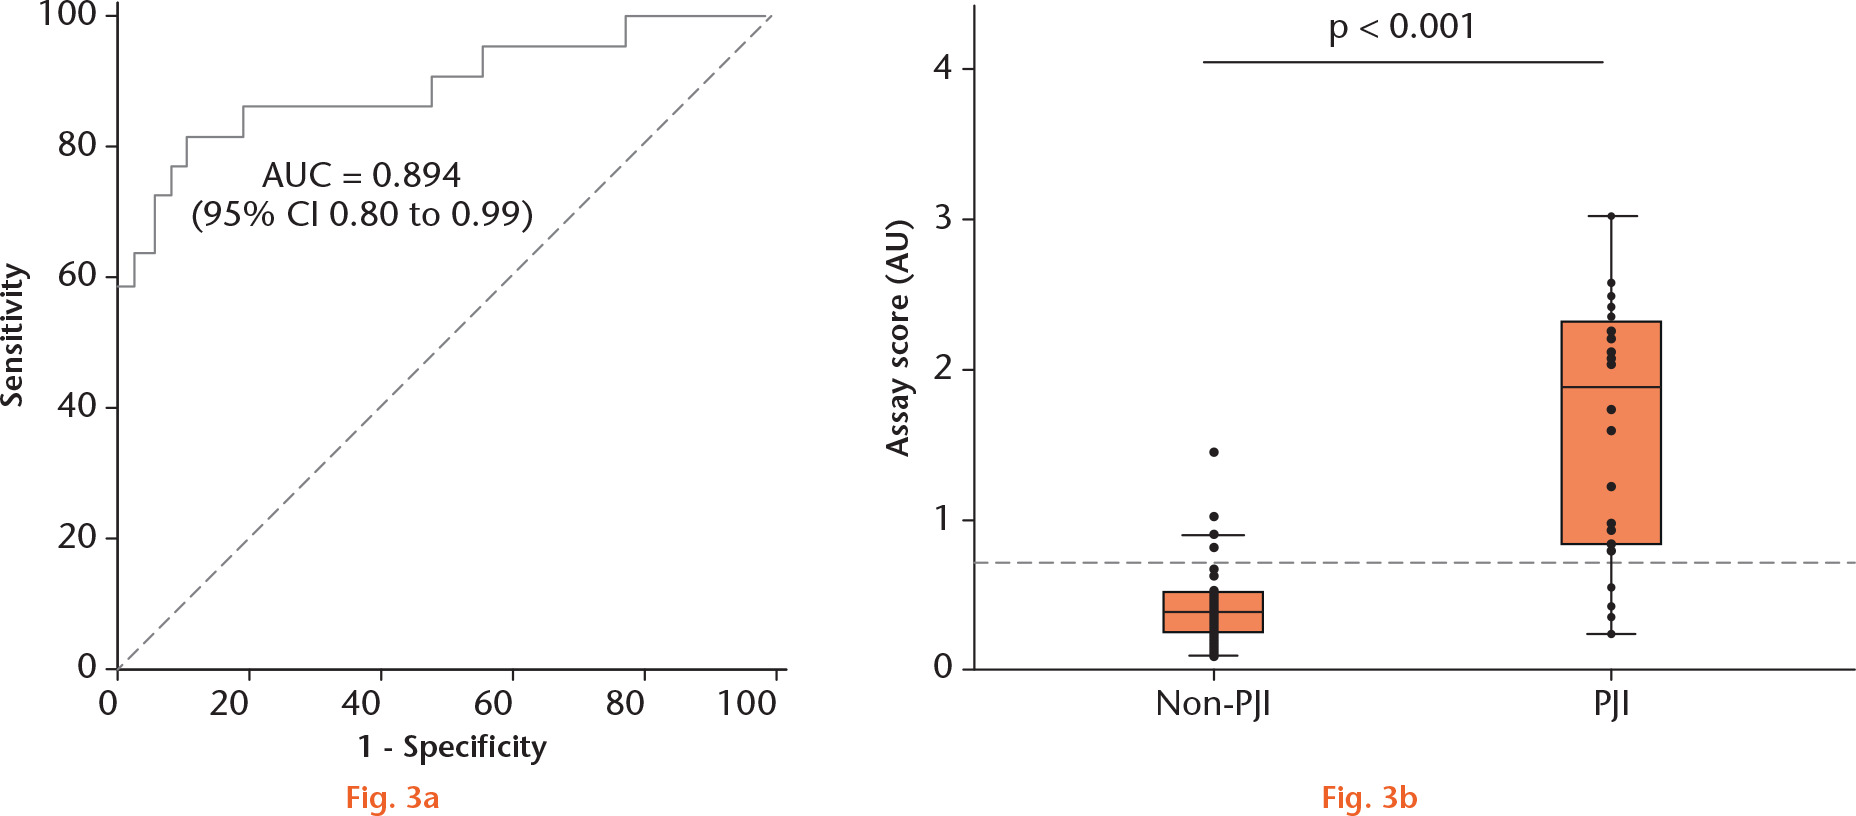  
            Validation of the test performance using the validation cohort: a) receiver operating characteristic (ROC) curve for the 16s rDNA test (ratio between test and control band on the test strip) to differentiate between periprosthetic joint infection (PJI) and non-PJI samples in the validation cohort; and b) box-whisker plot displaying the performance of the 16s rDNA test to differentiate between PJI (n = 23) and non-PJI (n = 37) samples in the validation cohort. Dashed lines indicate the predefined cut-off as determined using the proof-of-principle cohort. The Mann–Whitney U test was used to obtain p-values. AUC, area under the curve; CI, confidence interval; AU, assay unit.
          